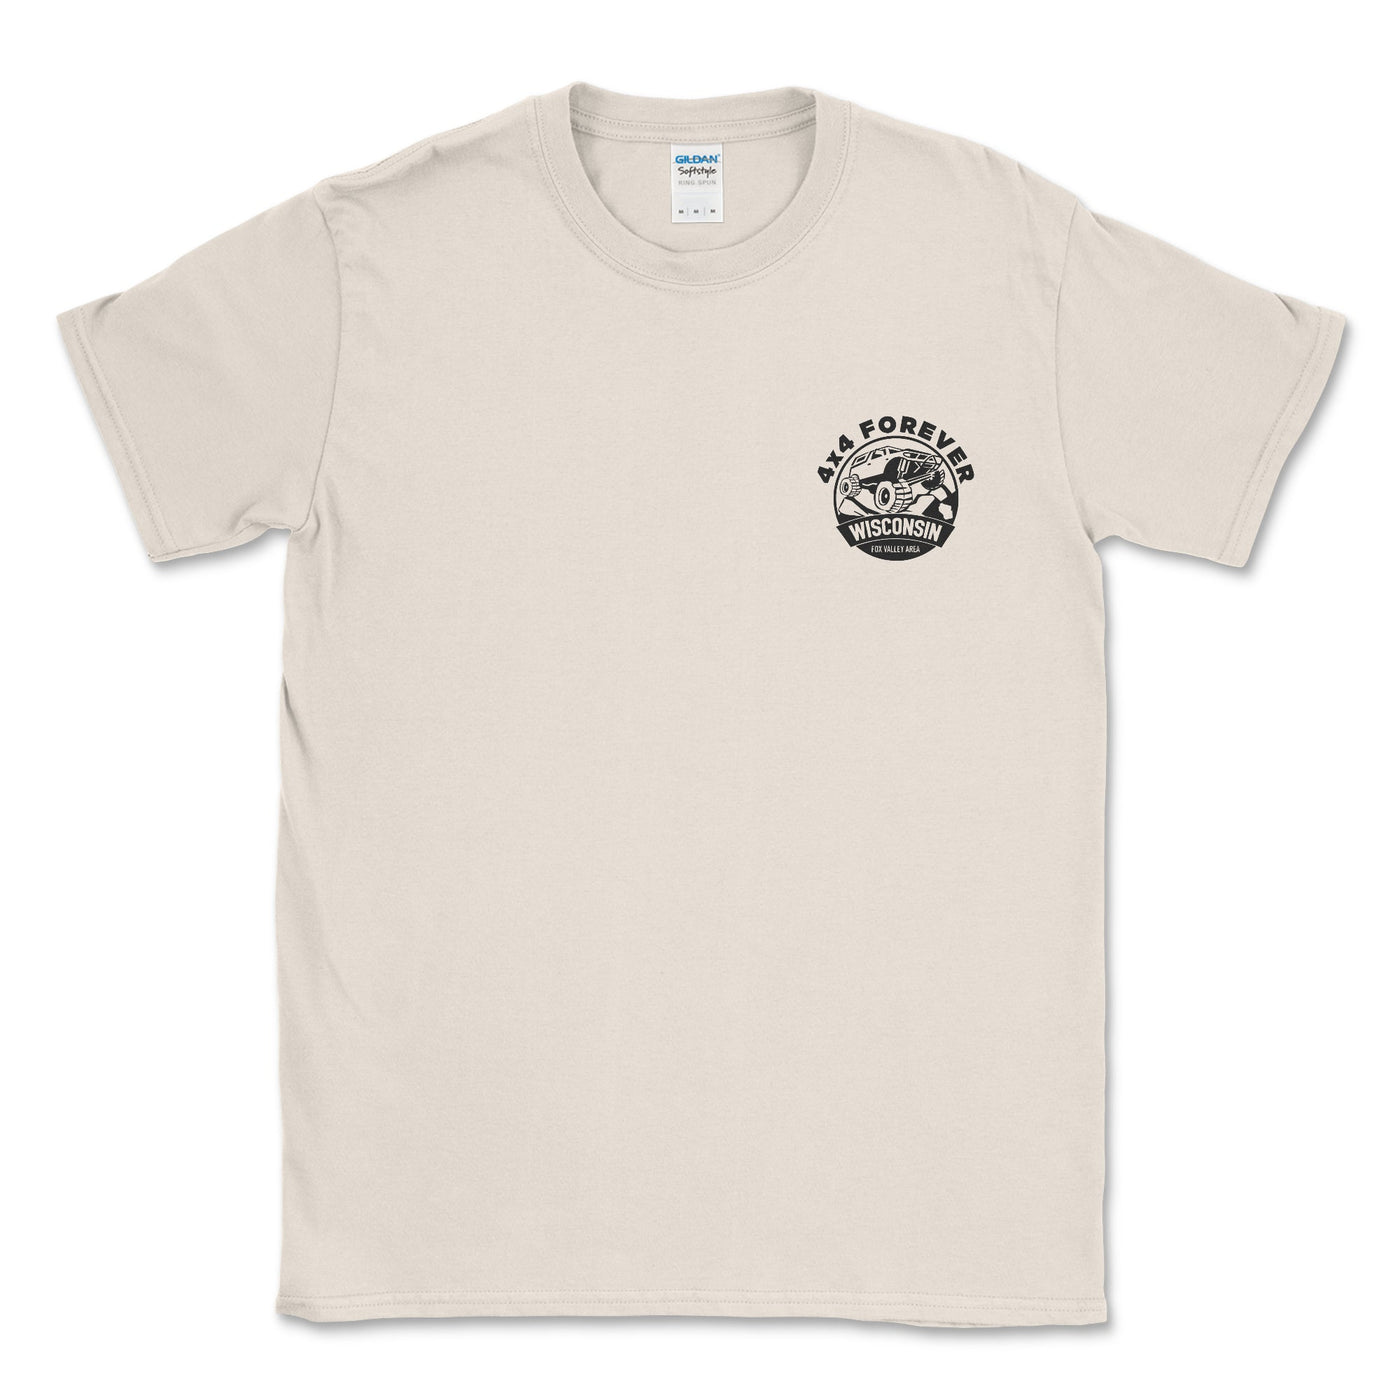 4 x 4 Forever Tee Shirt - Goats Trail Off - Road Apparel Company